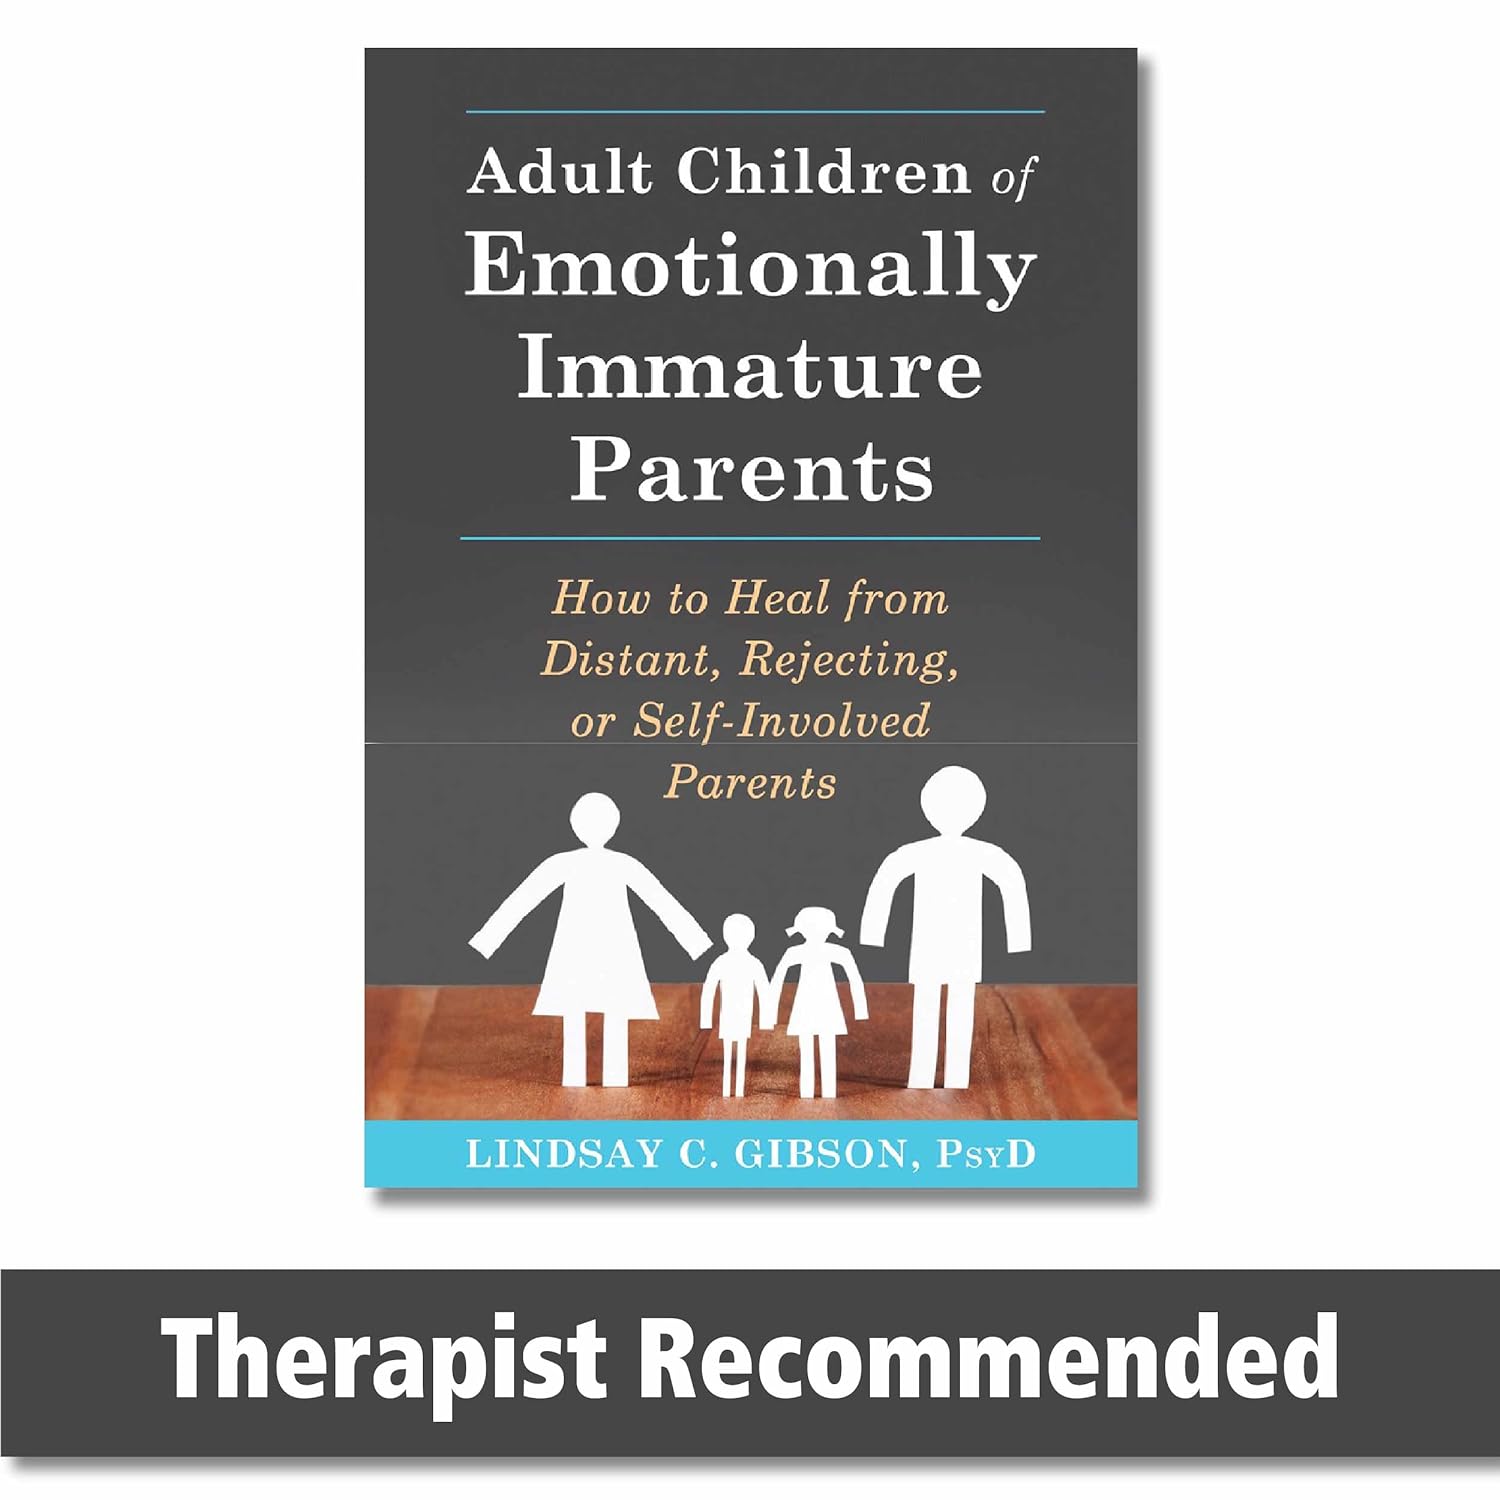 Book Cover - Adult Children of Emotionally Immature Parents by Lindsay Gibson